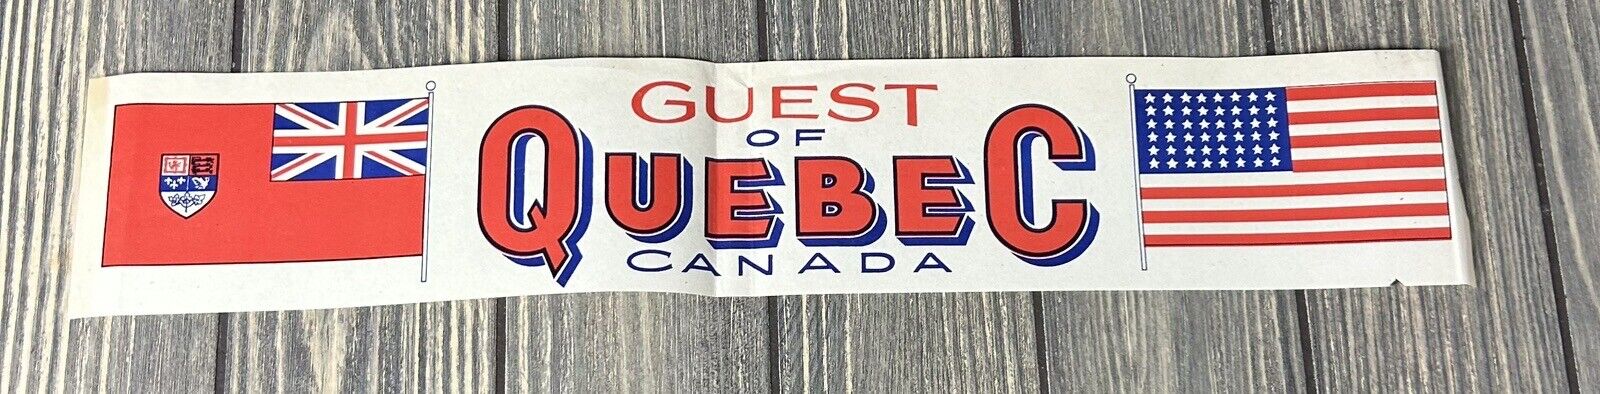 Vintage Guest Of Quebec Canada These Stores On Hall On City Hall Square 